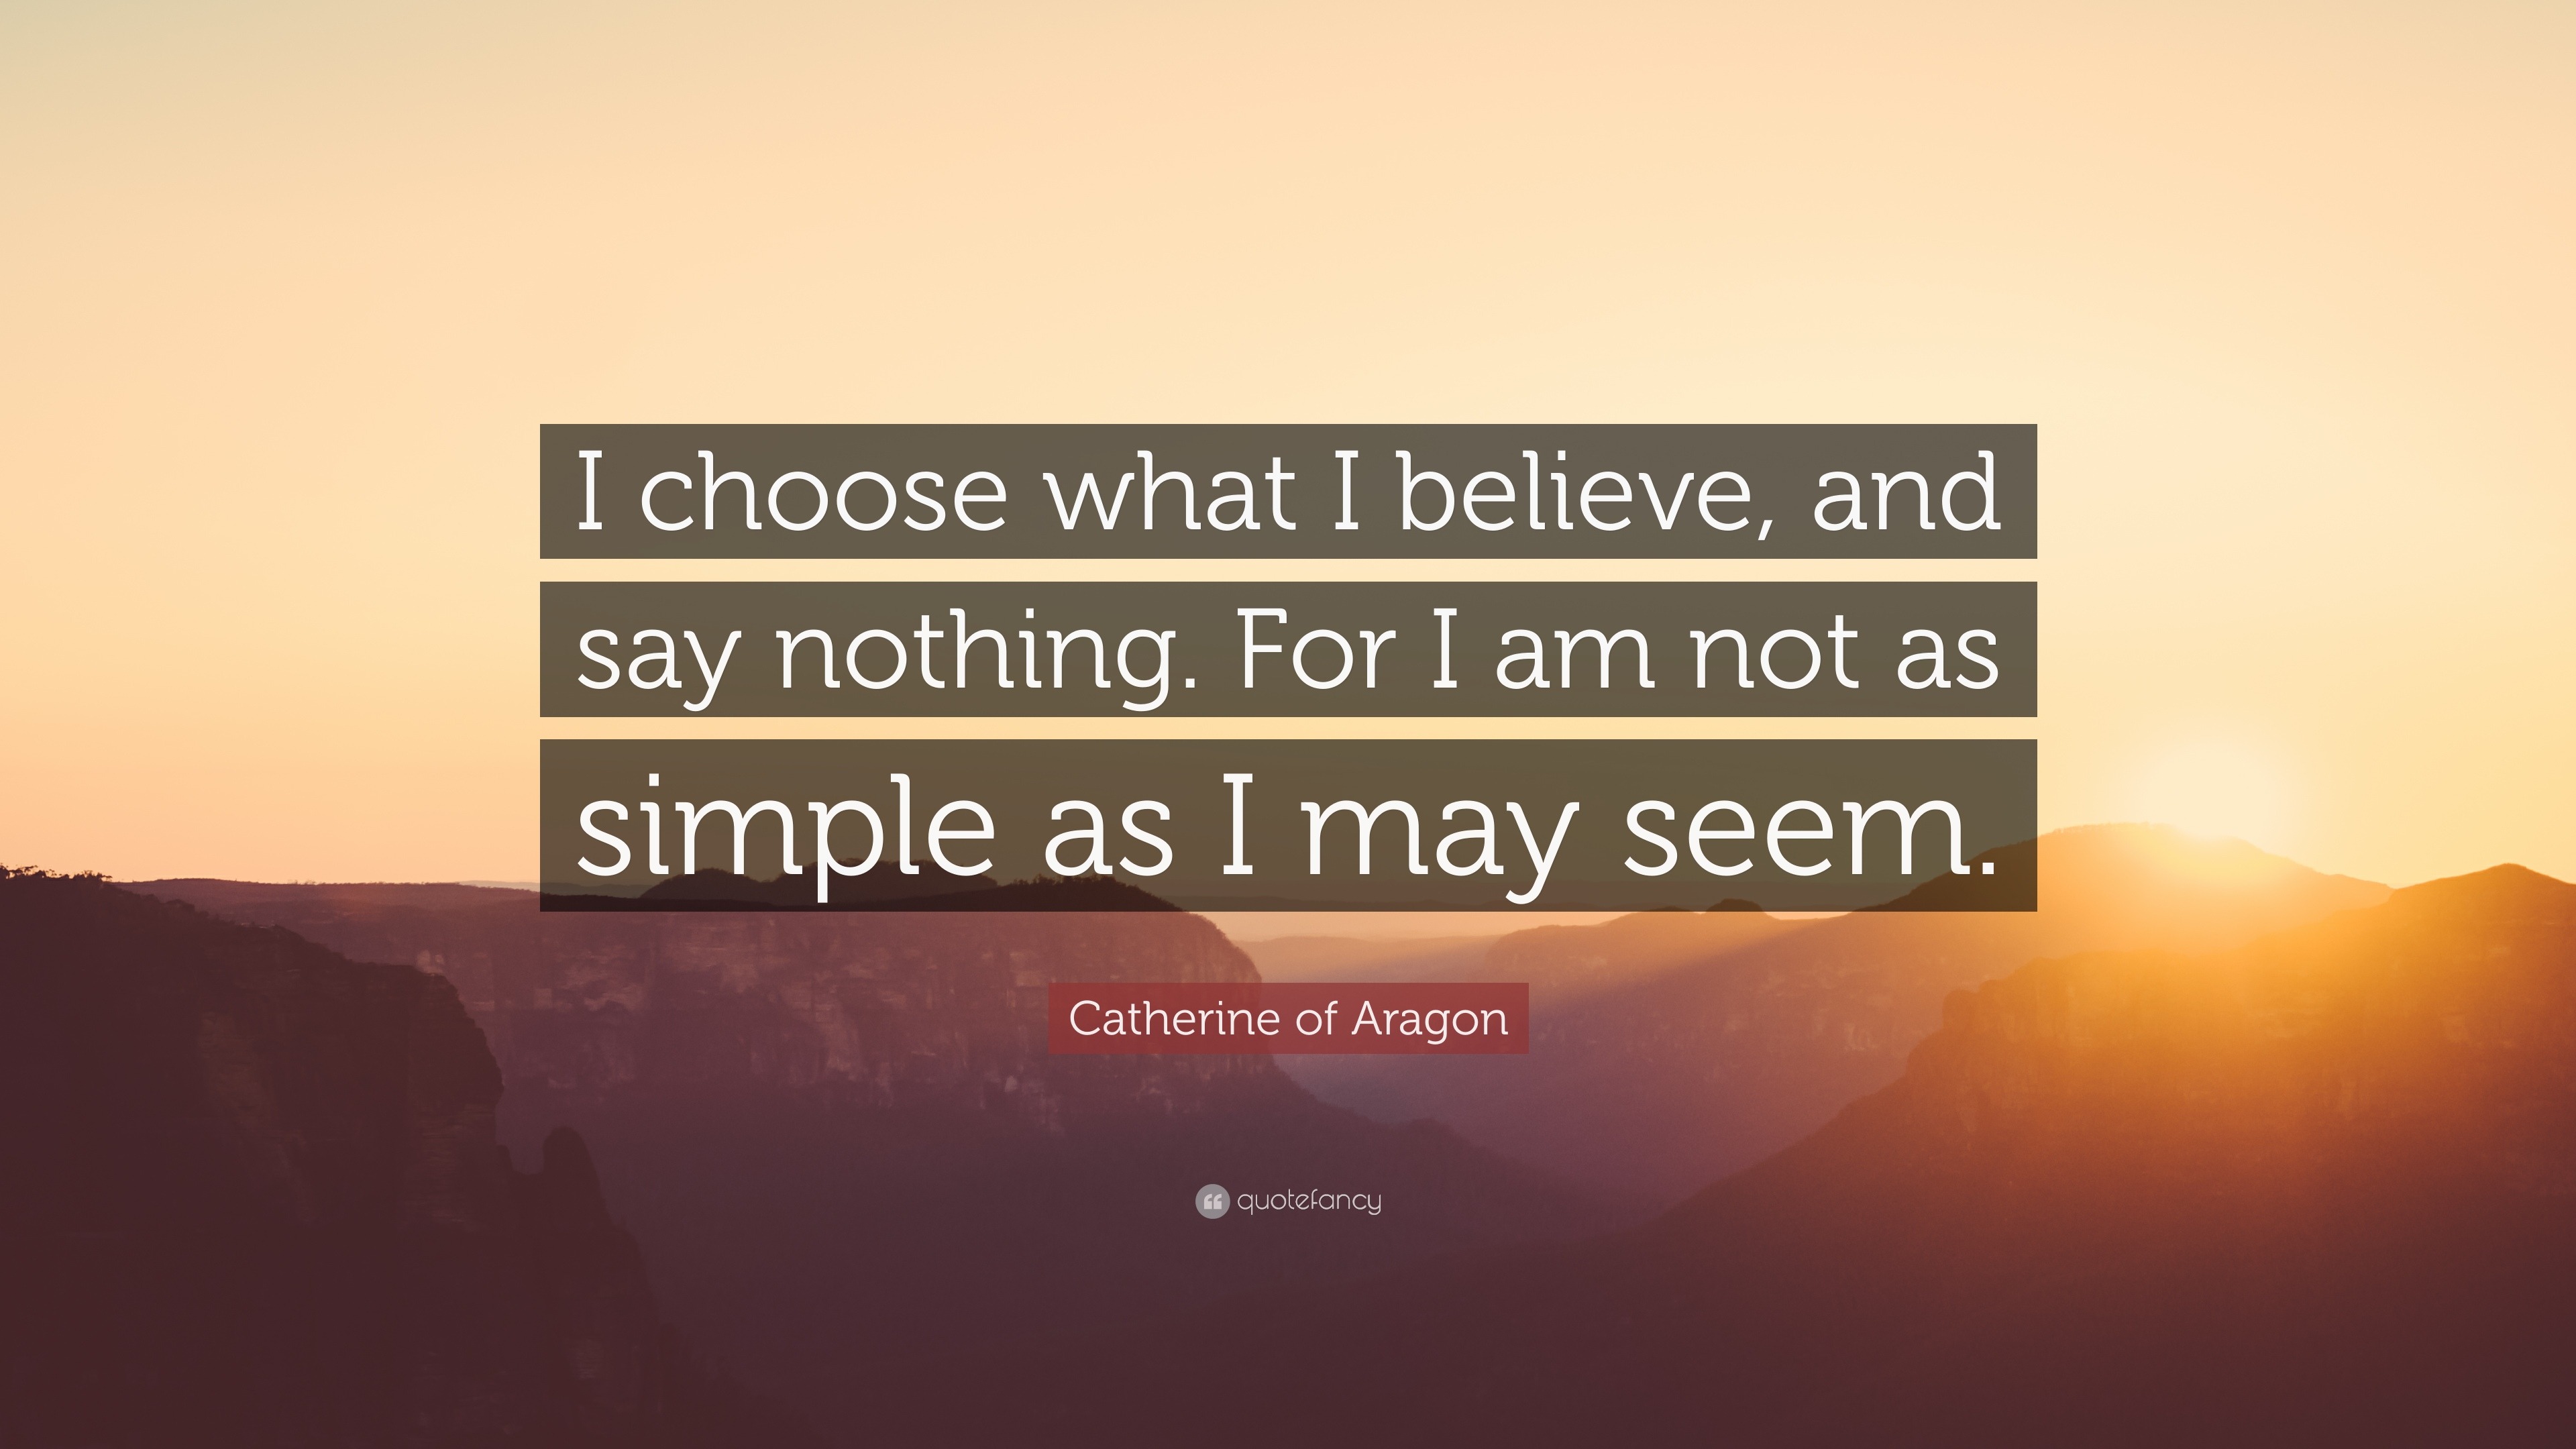 Catherine of Aragon Quote: "I choose what I believe, and say nothing. For I am not as simple as ...